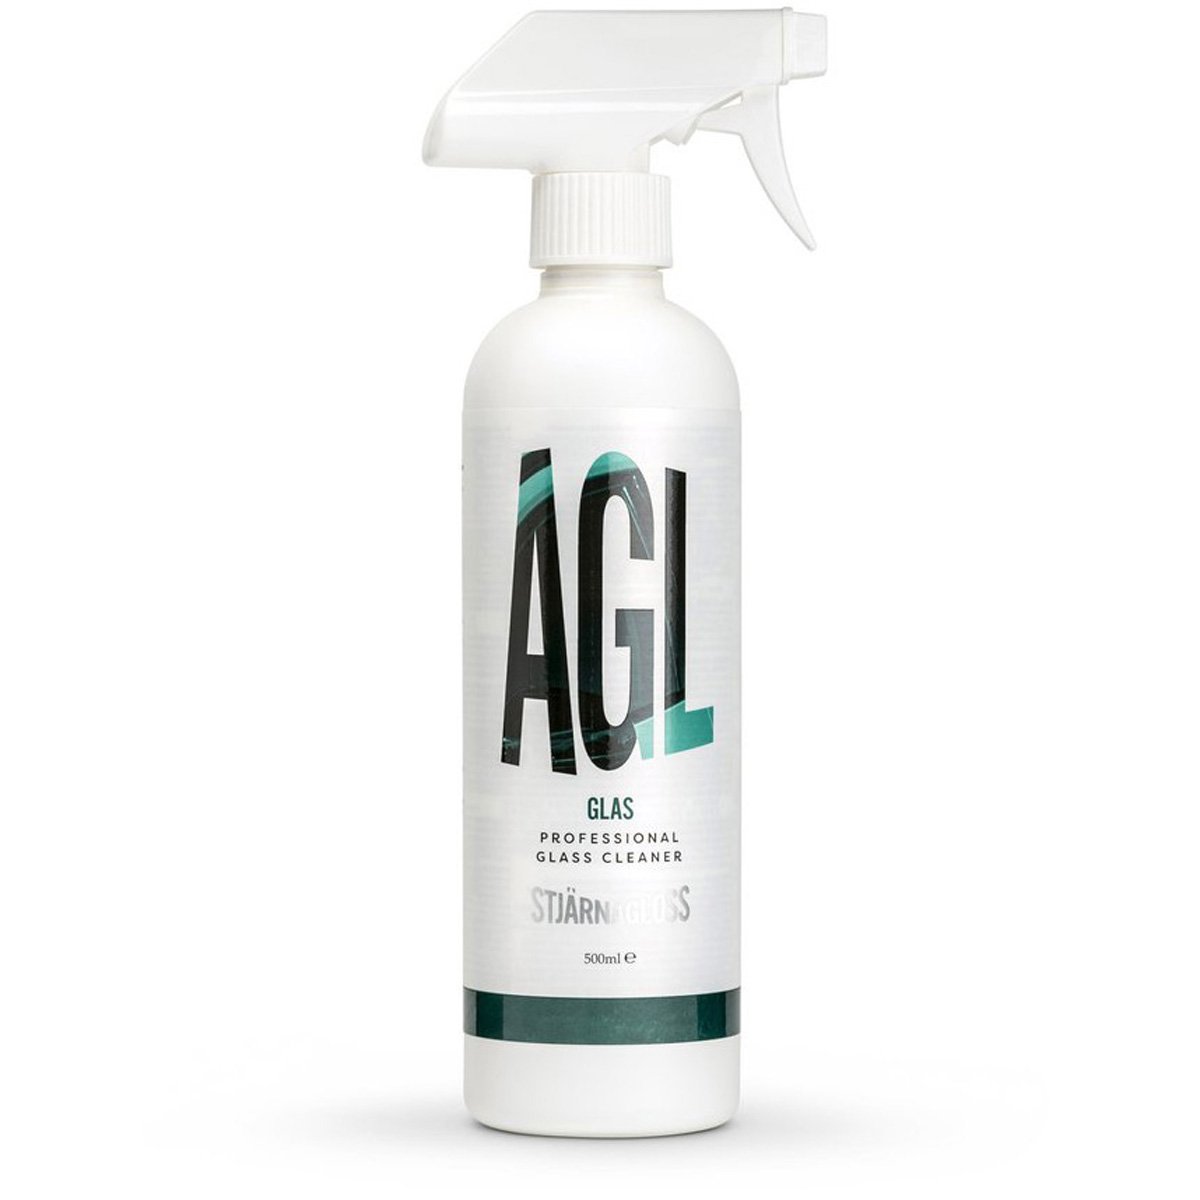 Glas Professional Glass Cleaner-500ml